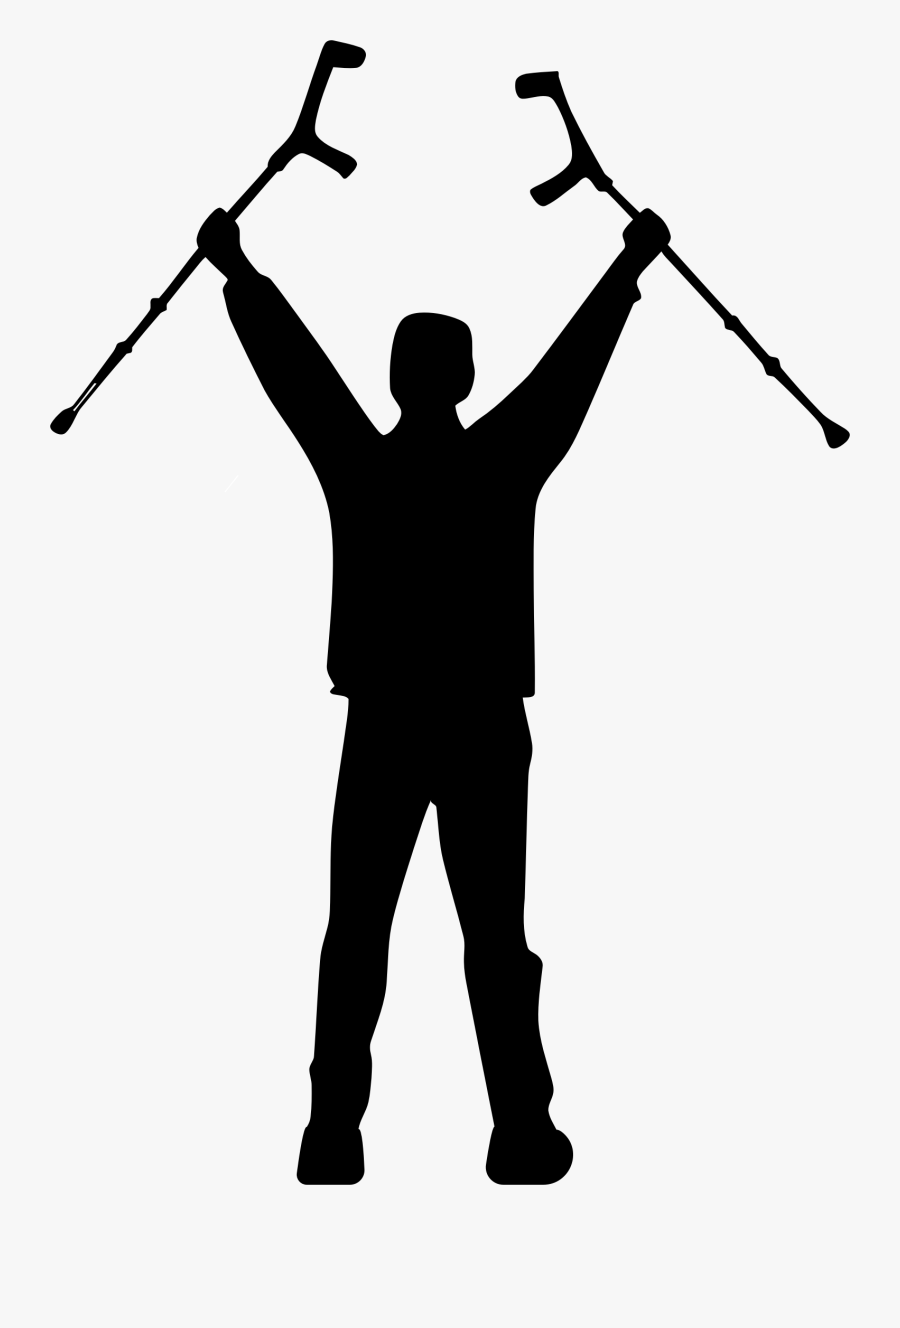 Shouting Silhouette At Getdrawings - Man With Crutches Silhouette, Transparent Clipart